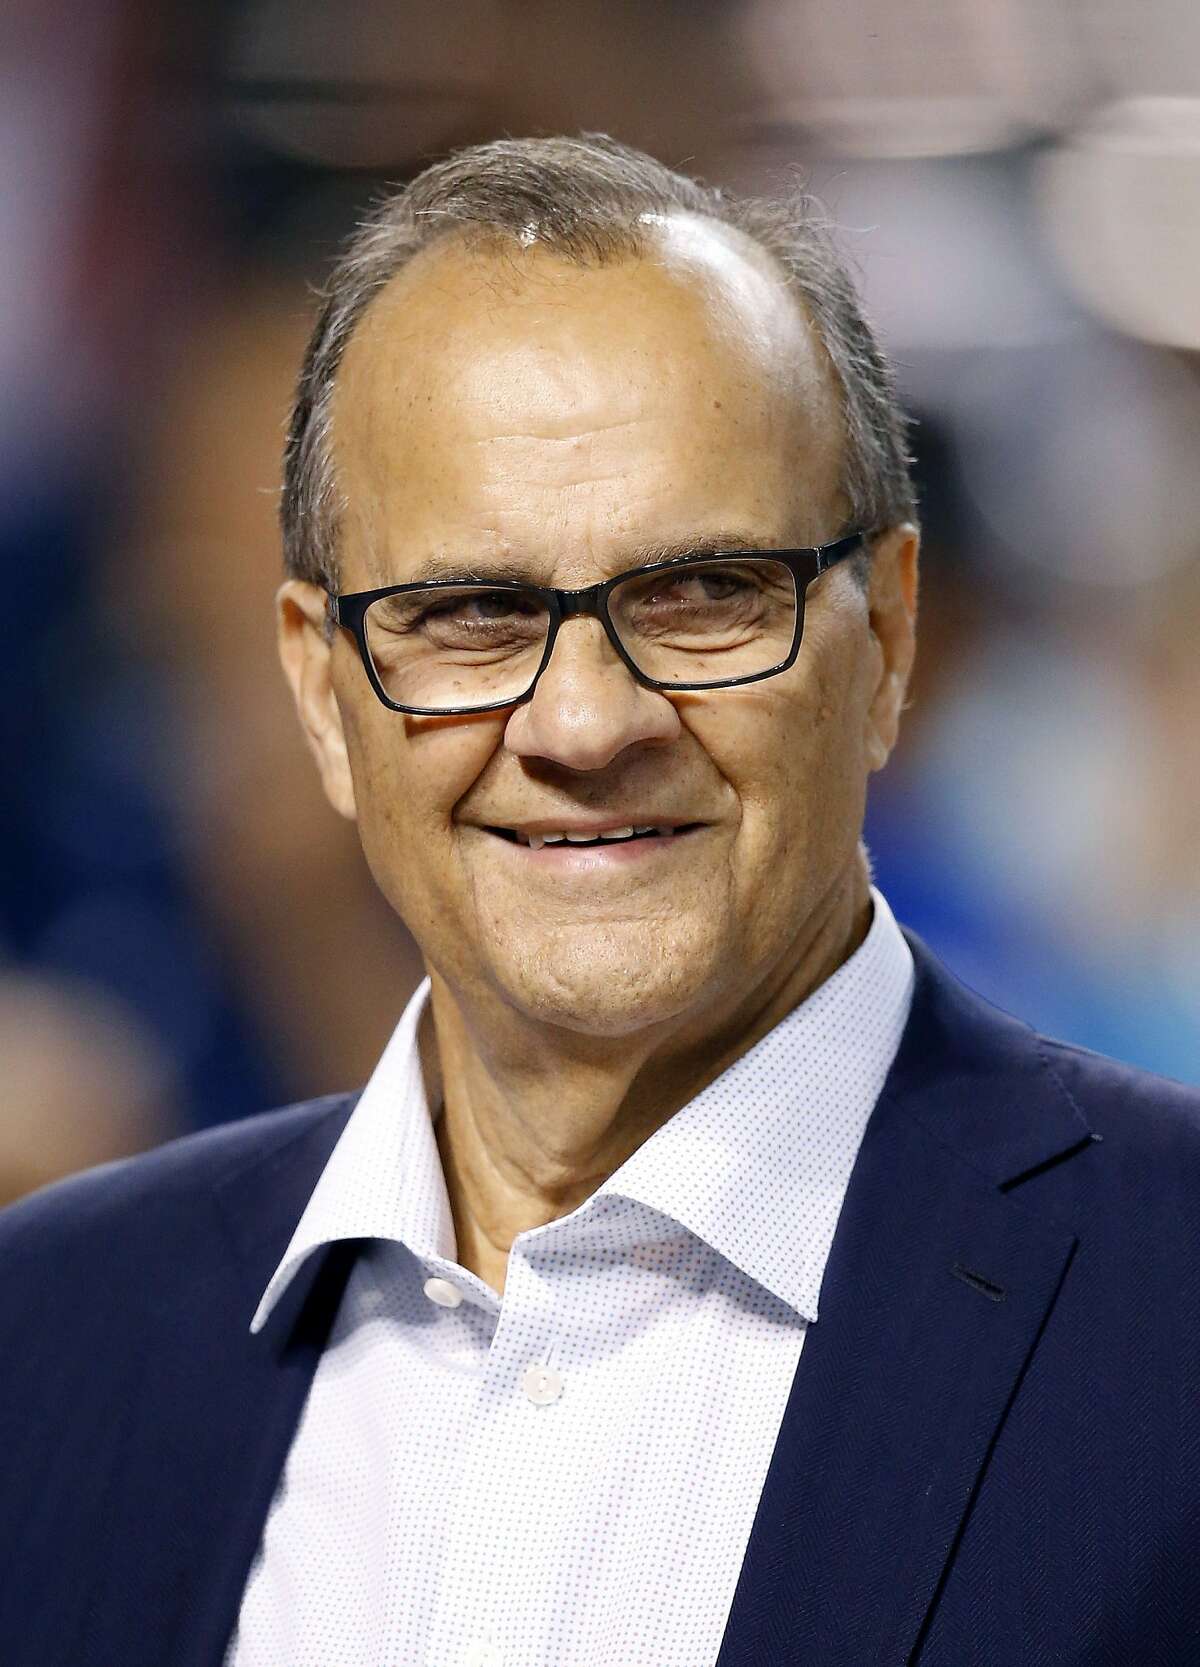 Joe Torre, Major League Baseball Chief Baseball Officer, former baseball player and manager, smiles as he takes in batting practice prior to a baseball game between the New York Yankees and the Arizona Diamondbacks Monday, May 16, 2016, in Phoenix. The Diamondbacks defeated the Yankees 12-2. (AP Photo/Ross D. Franklin)